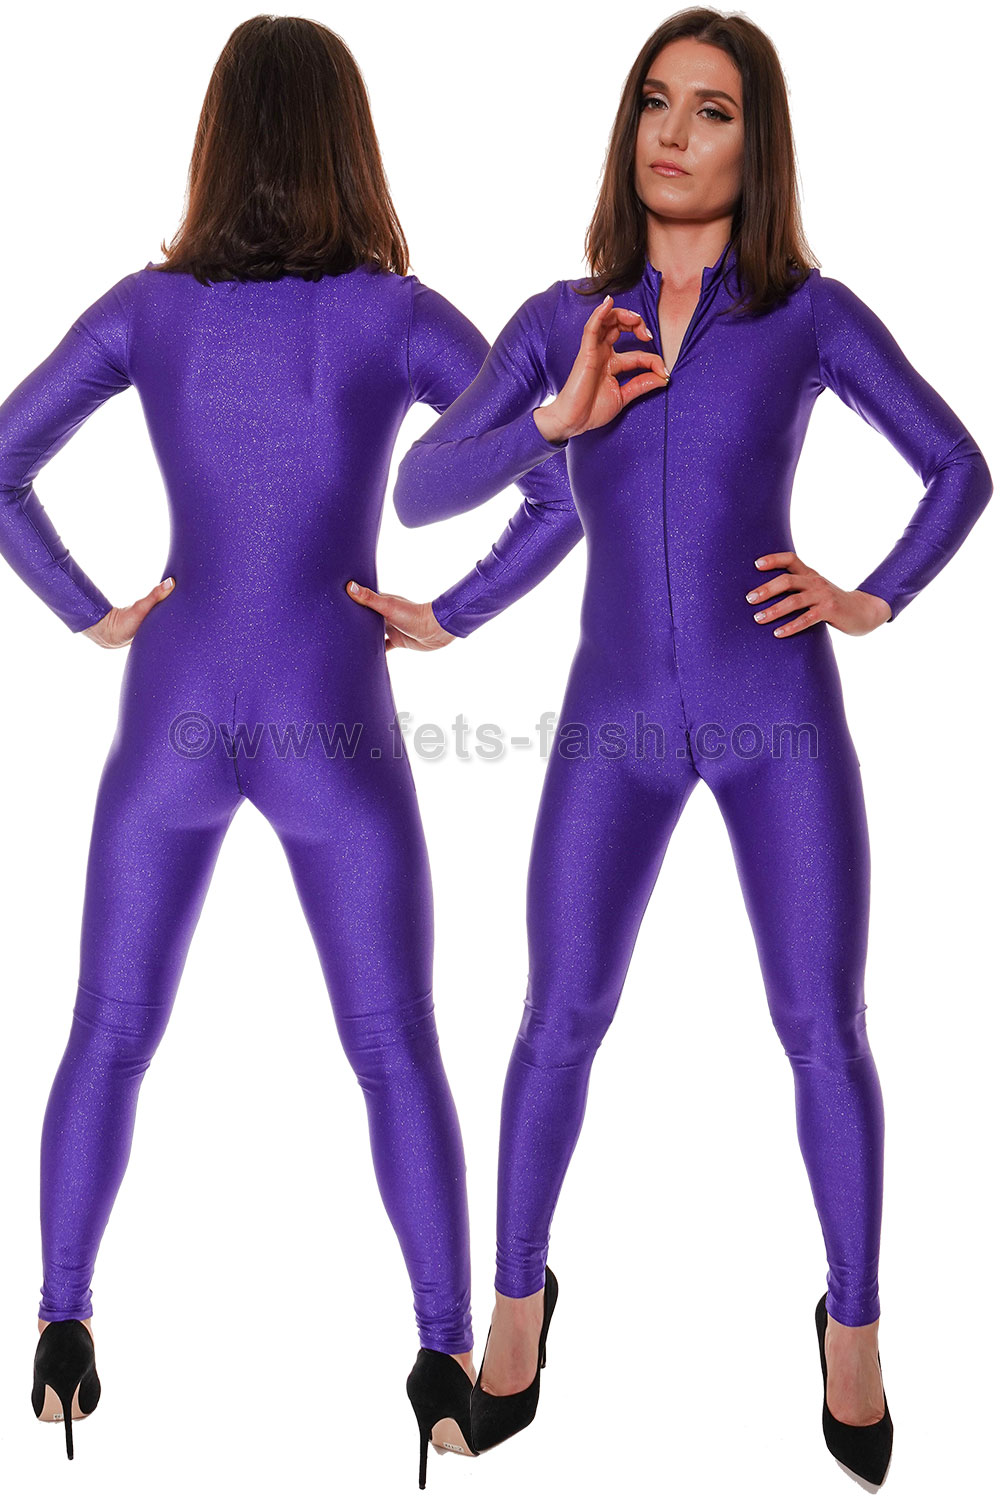 Fets Fash Catsuit Purple Stardust with front zip-fastener